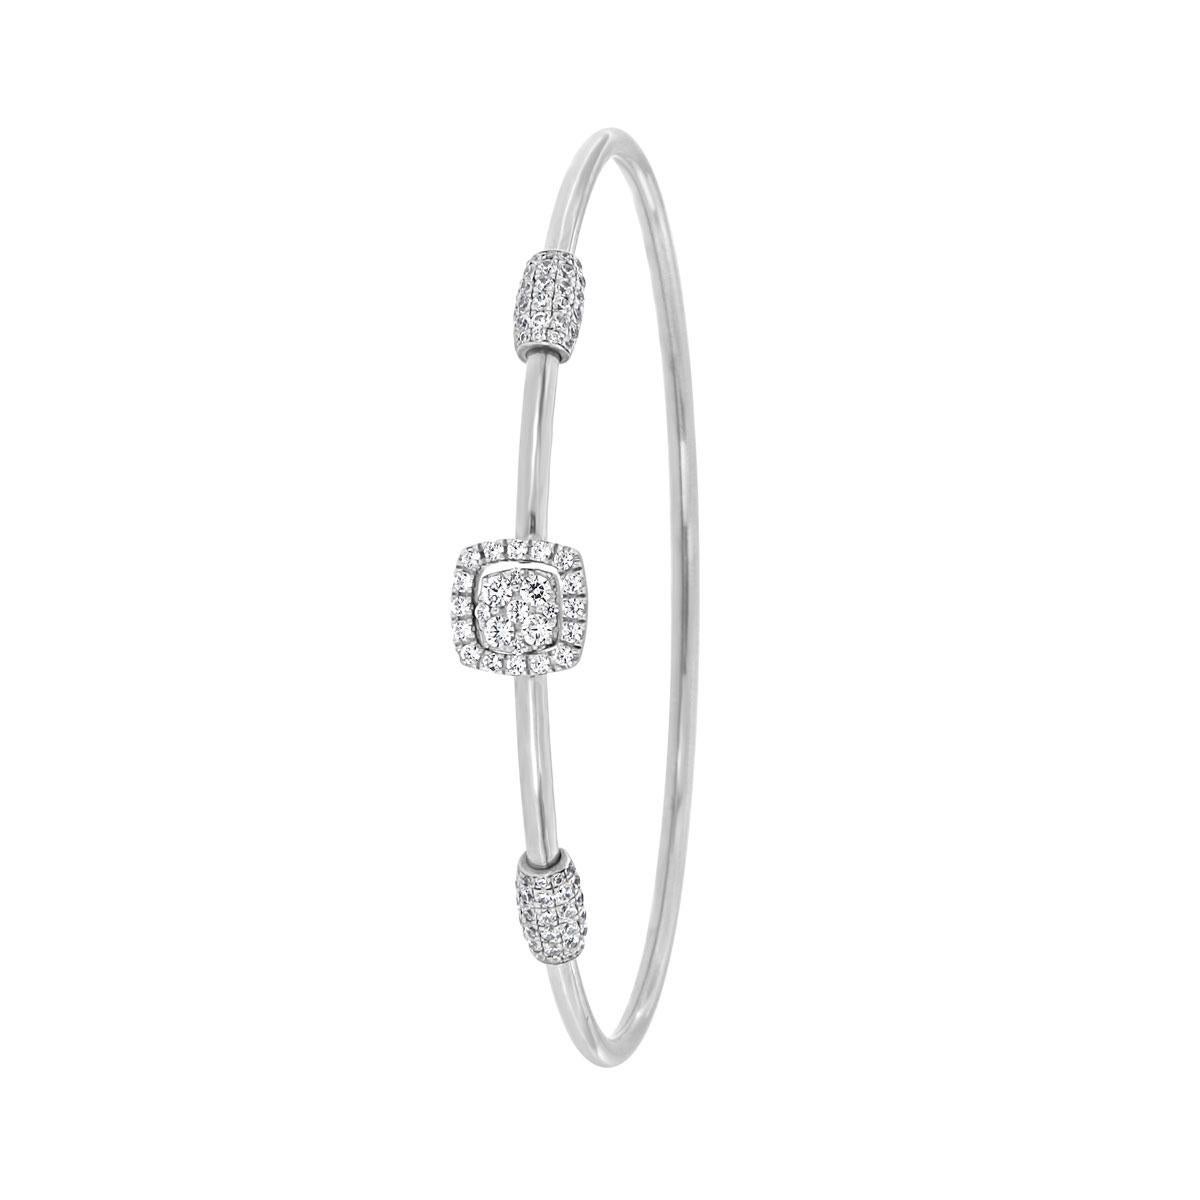 This fashionable flex bangle features Cushion brilliant diamonds micro-prong-set in a round halo. Experience the difference!

Product details: 

Center Gemstone Type: NATURAL DIAMOND
Center Gemstone Color: WHITE
Center Gemstone Shape: ROUND
Center